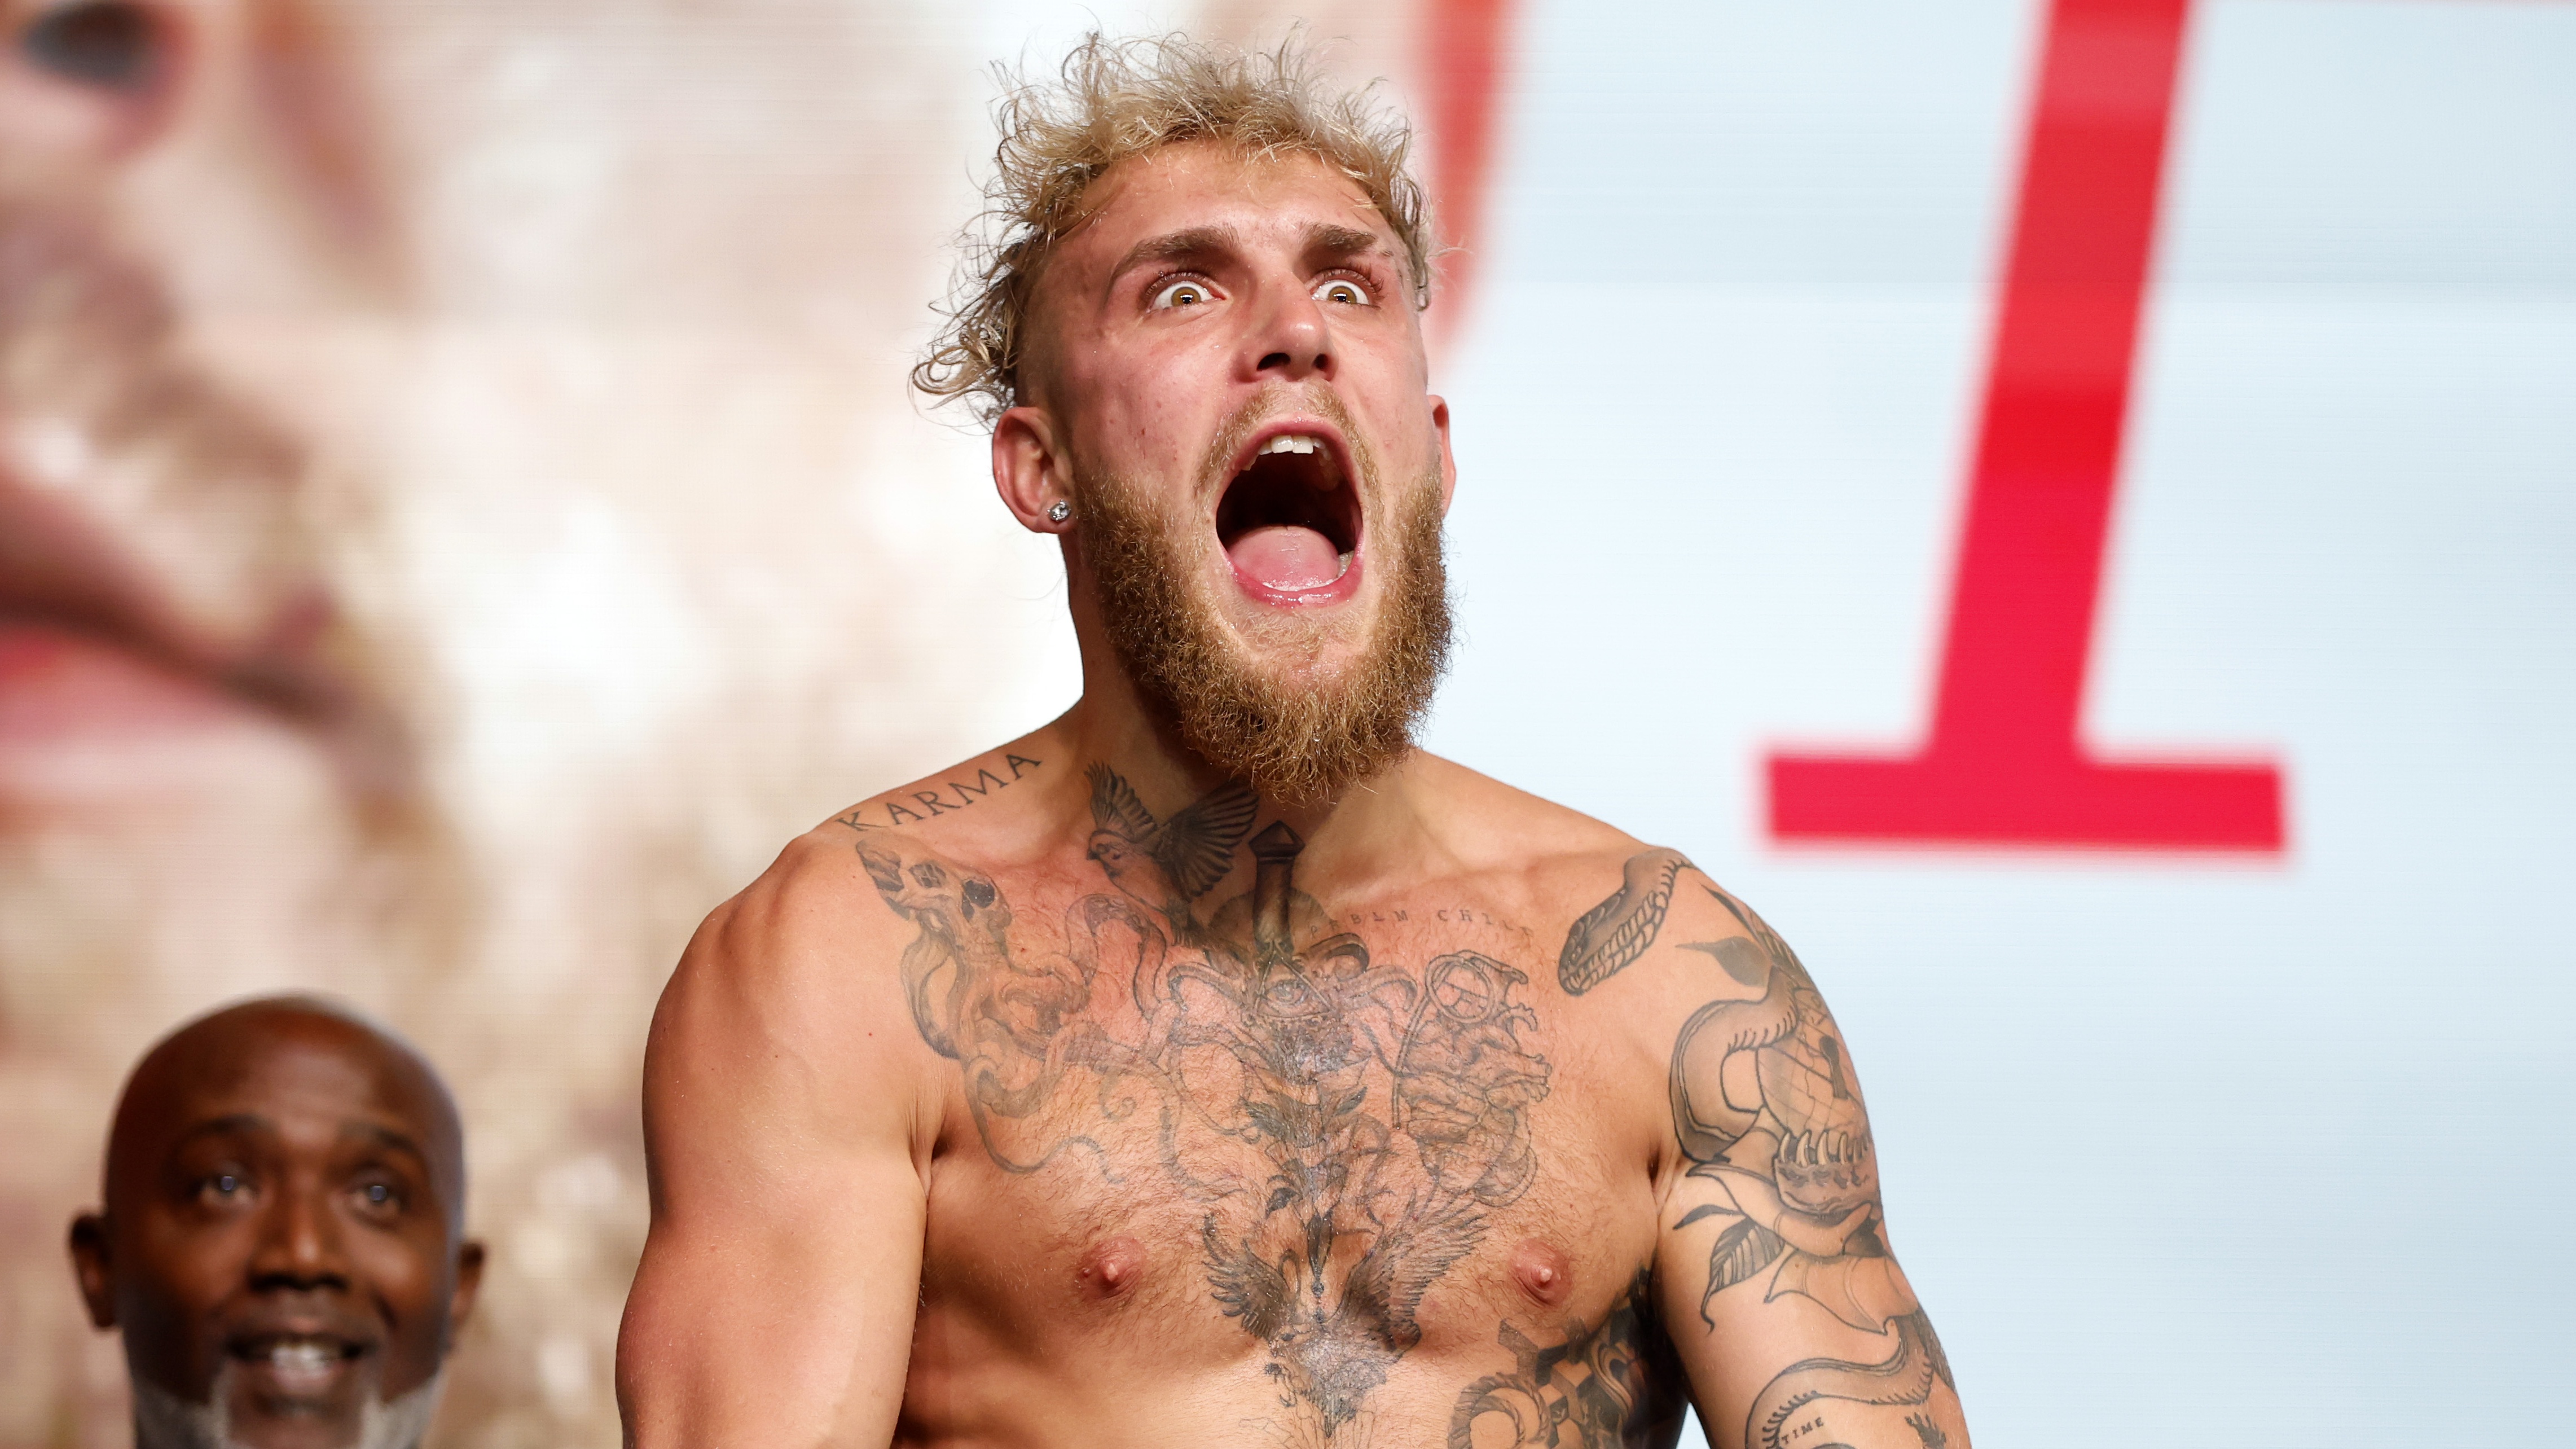 Jake Paul vs Nate Diaz live stream How to watch boxing online right now, non-PPV option, fight card, start time, odds Toms Guide